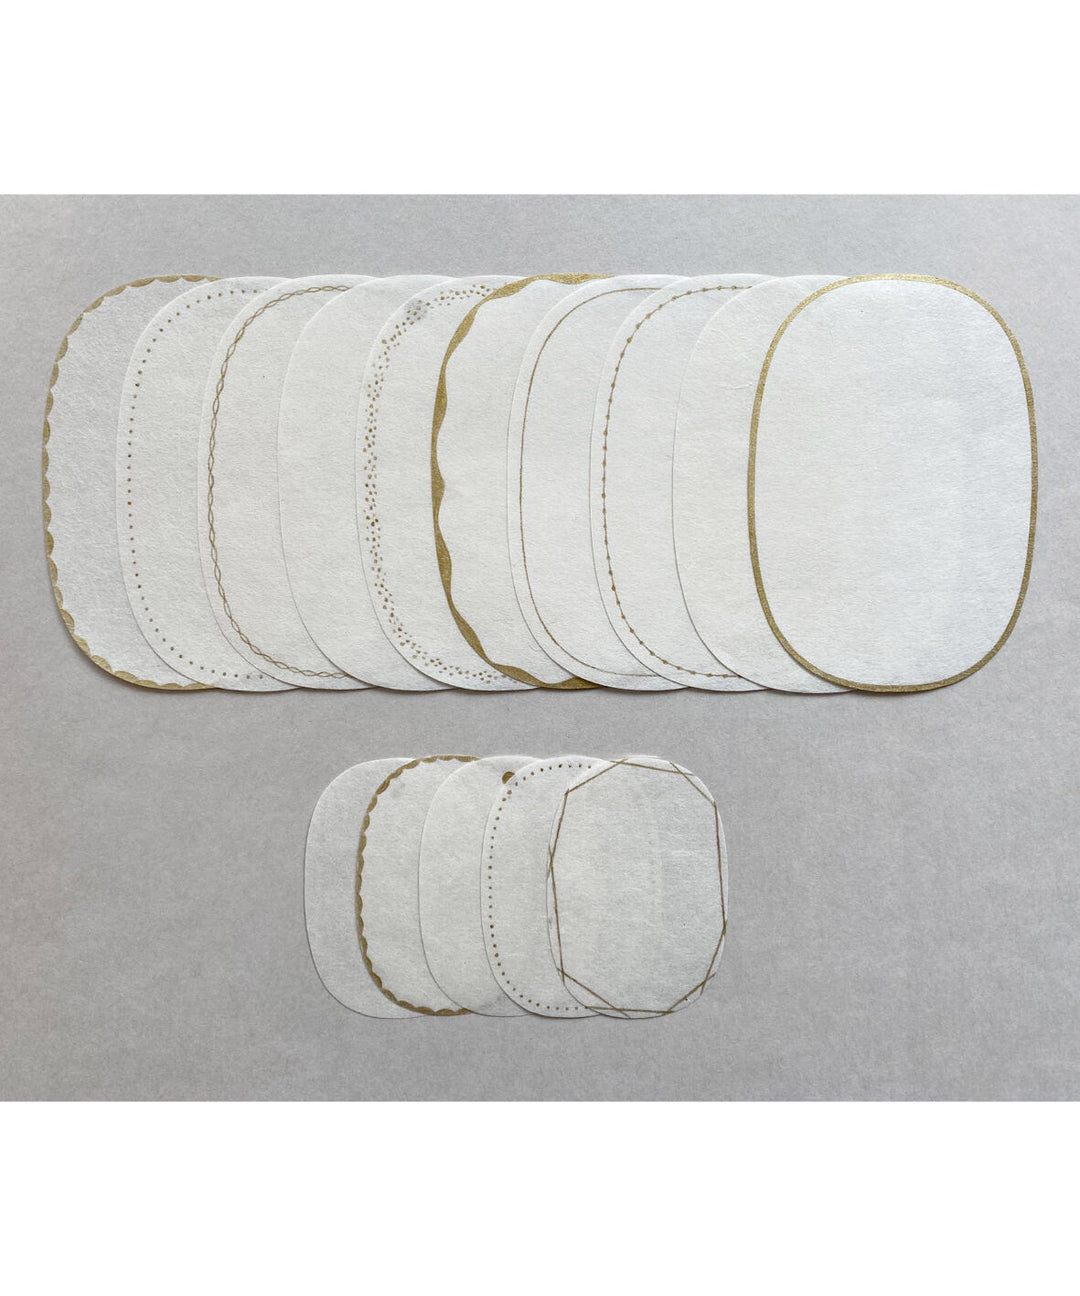 Letter Paper -Oval shaped Washi paper (10 Sheets + 5 Small Sheets)